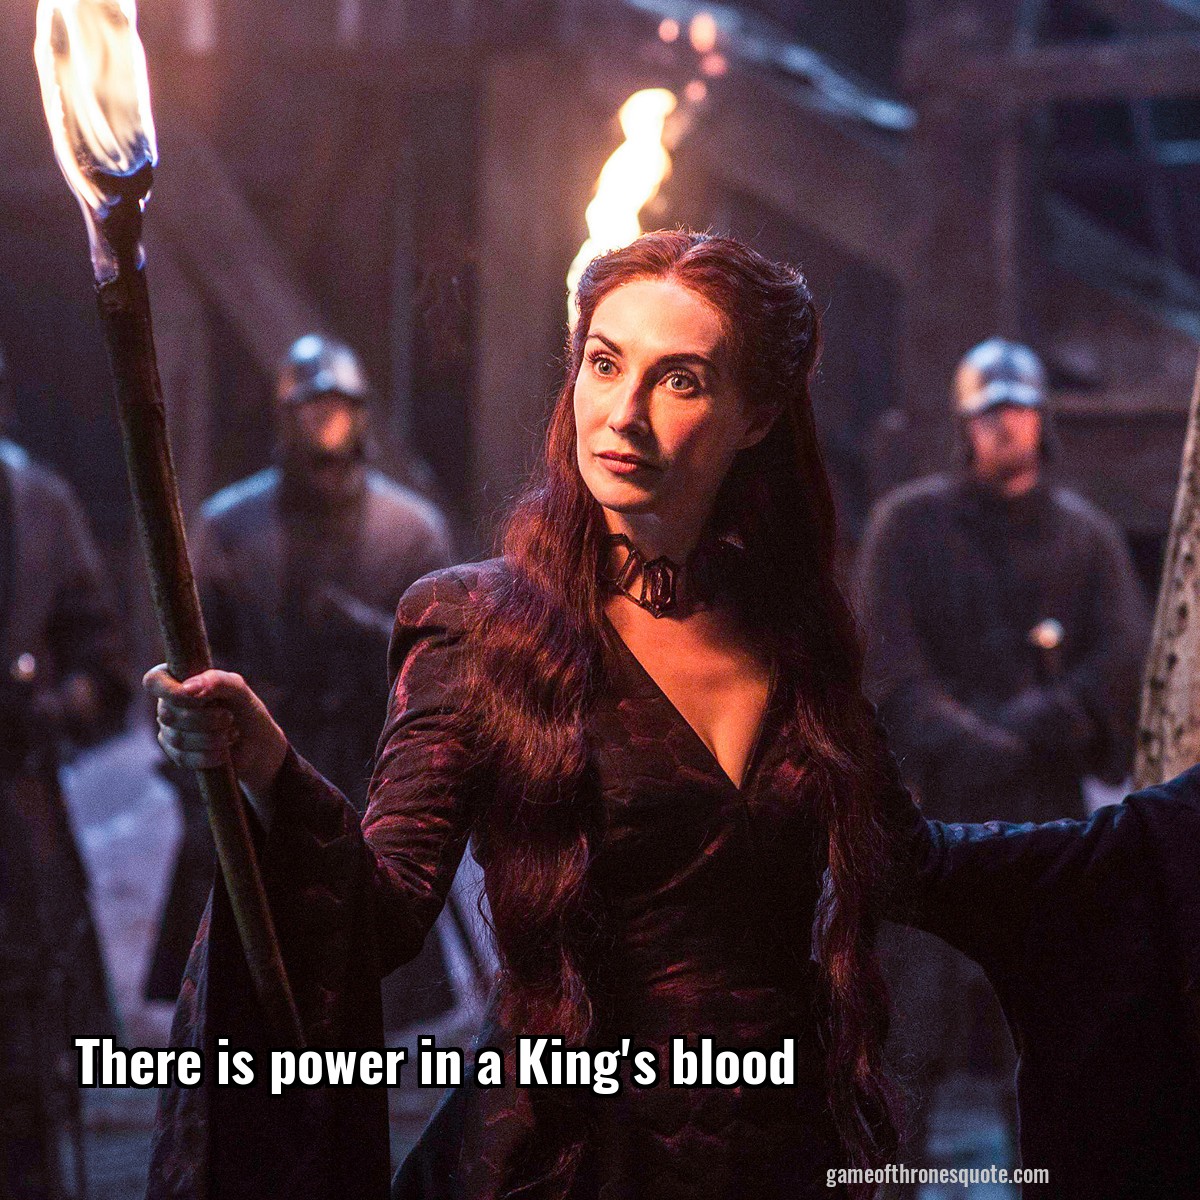 There is power in a King's blood